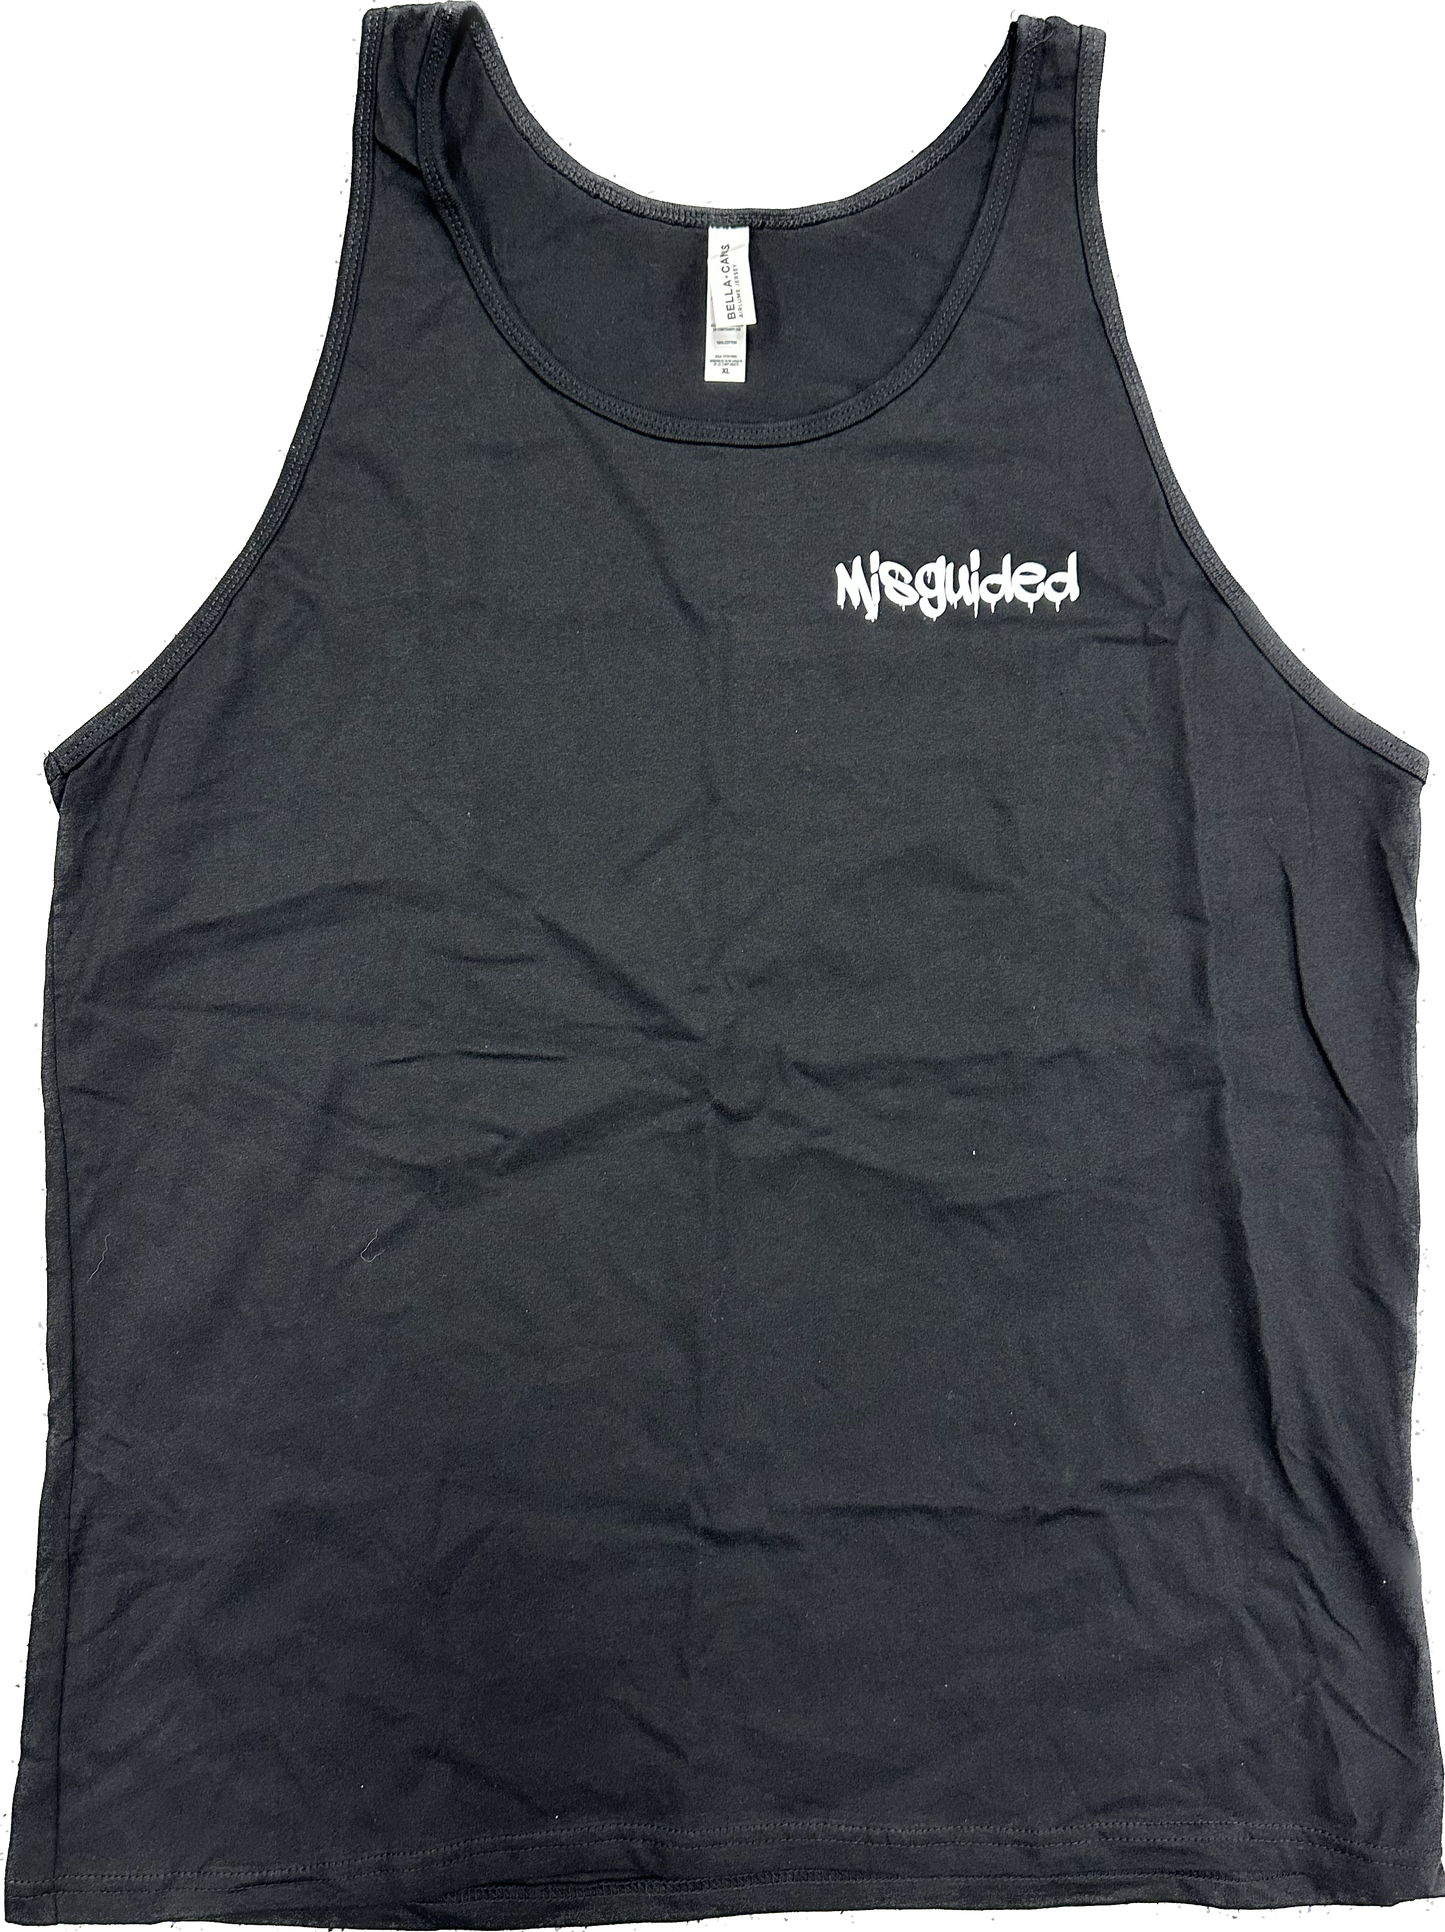 Misguided Tank Top!